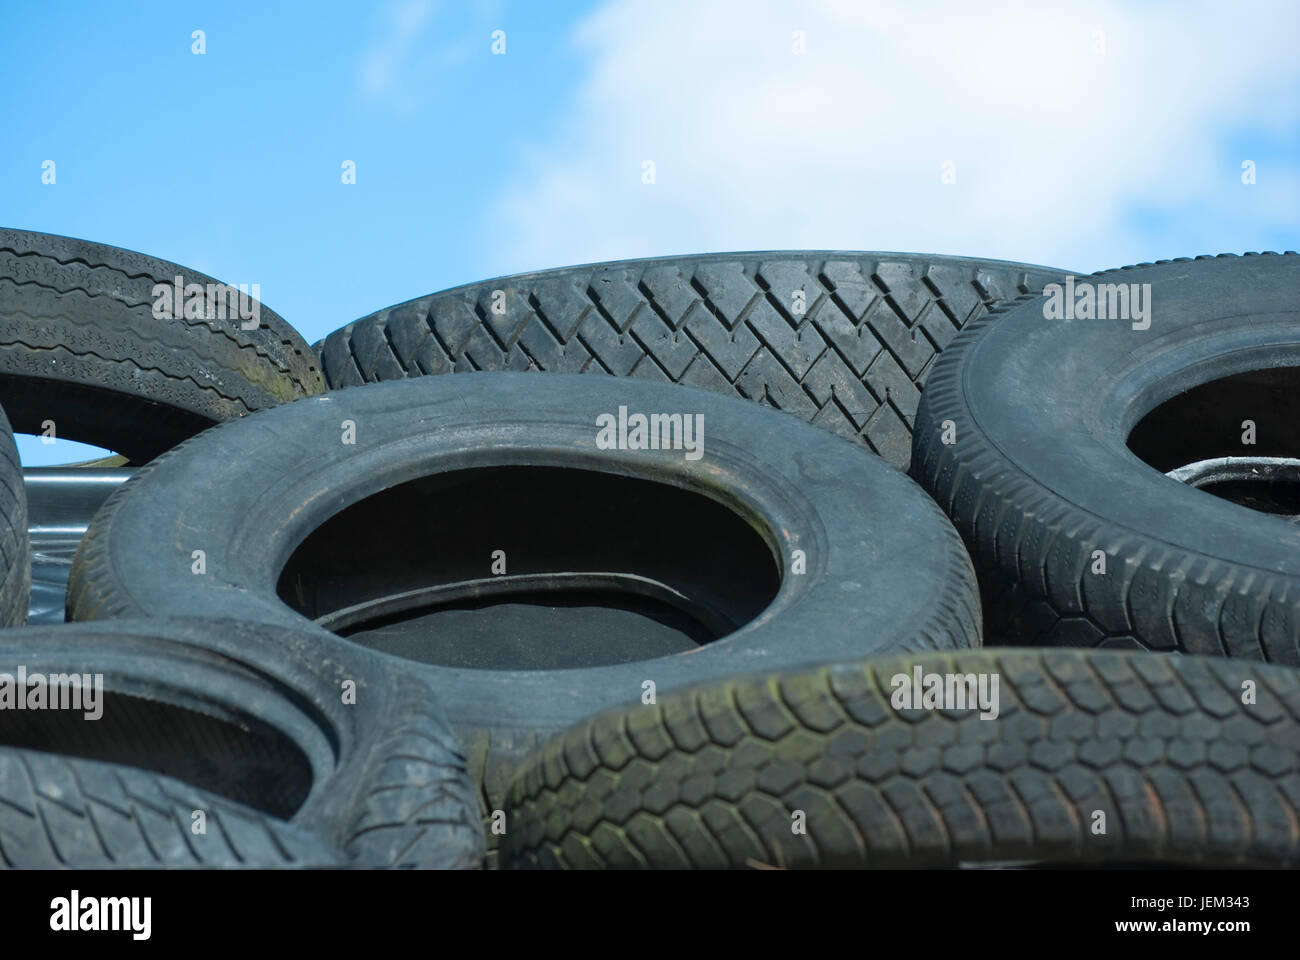 A recycle pile of used rubber car tyres, with blue sky and fluffy white clouds in the background. Stock Photo